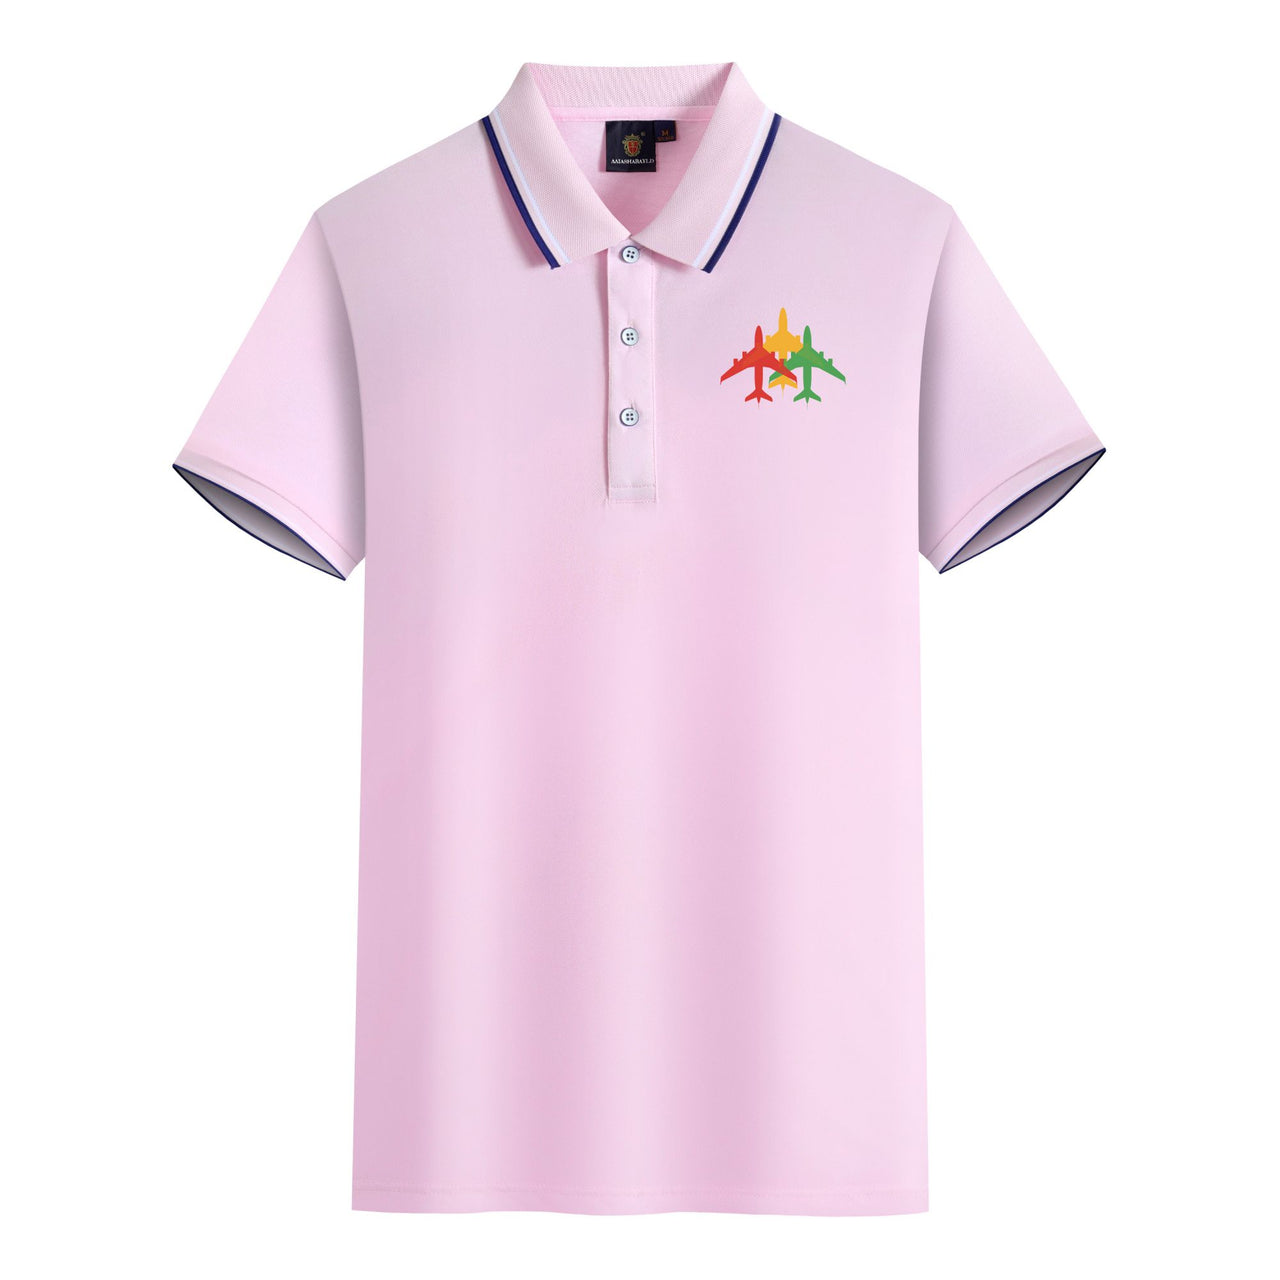 Colourful 3 Airplanes Designed Stylish Polo T-Shirts